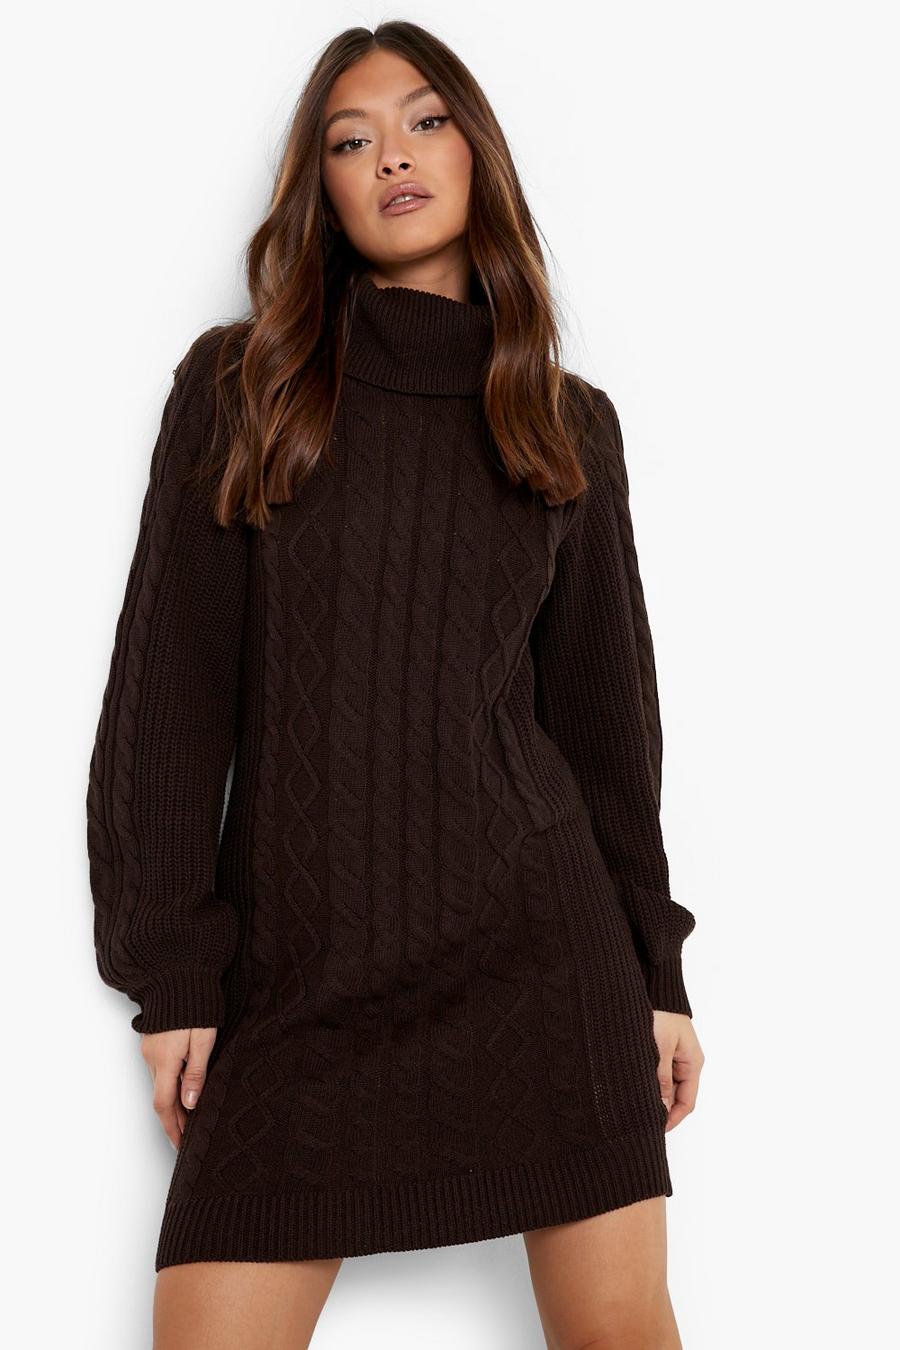 Chocolate brown Roll Neck Cable Knitted Jumper Dress